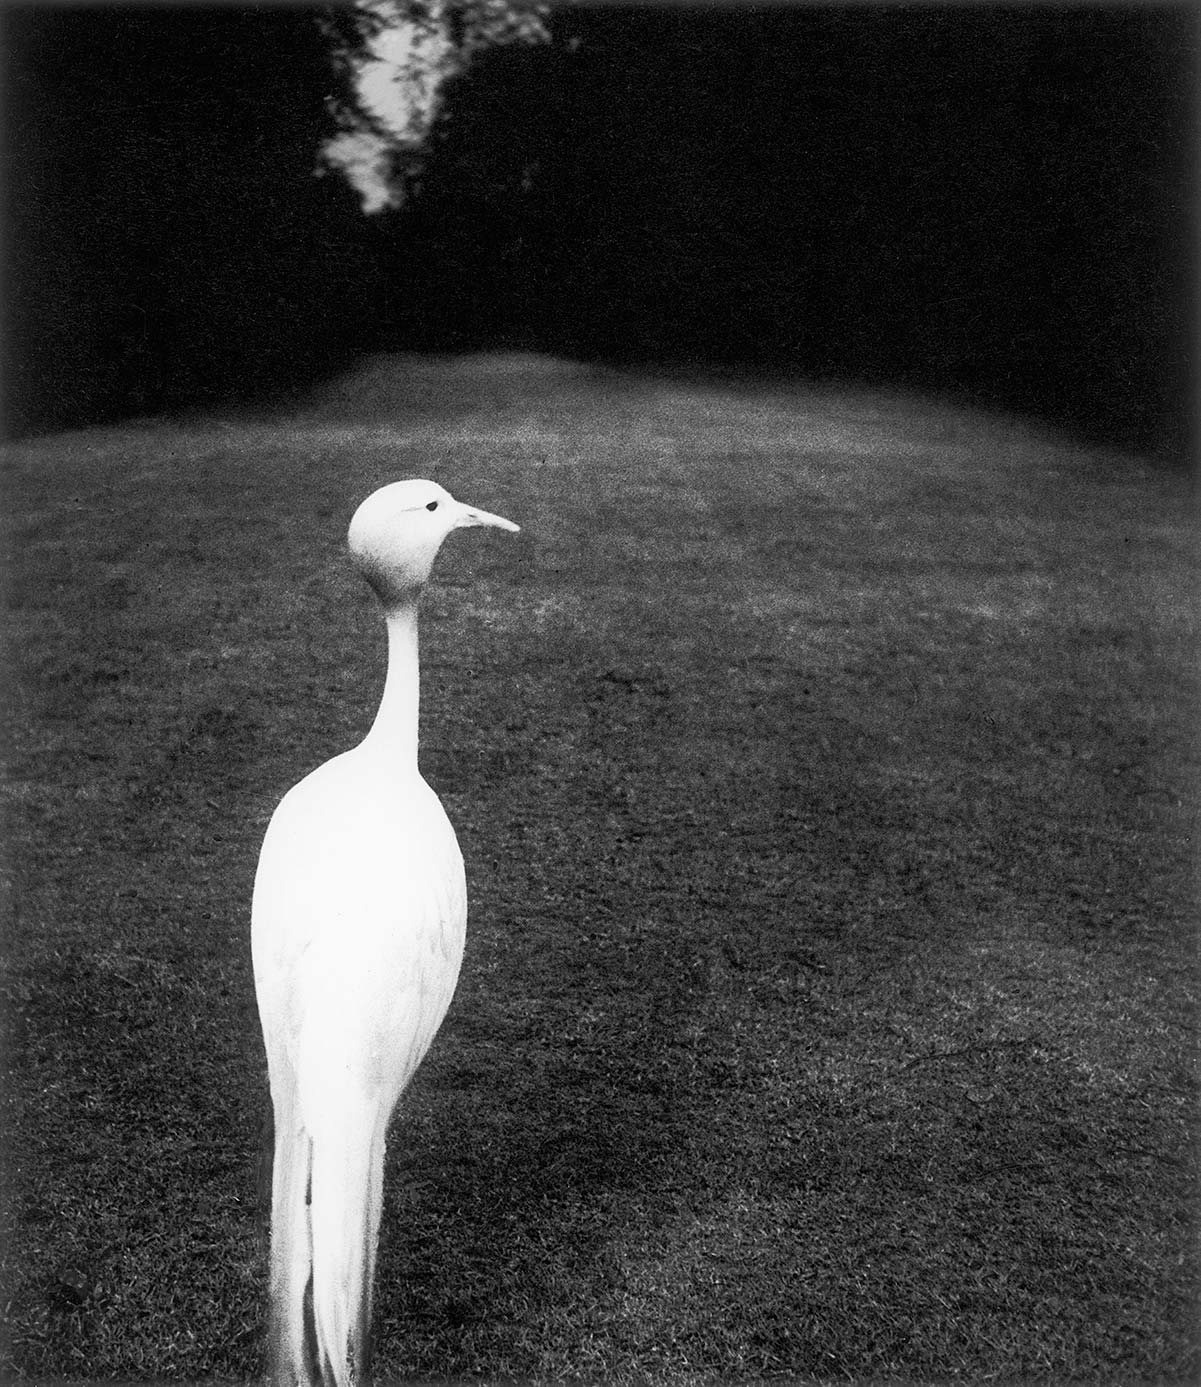 Evening in Kew Gardens, 1932  - Private collection, Courtesy Bill Brandt Archive and Edwynn Houk Gallery © Bill Brandt / Bill Brandt Archive Ltd.